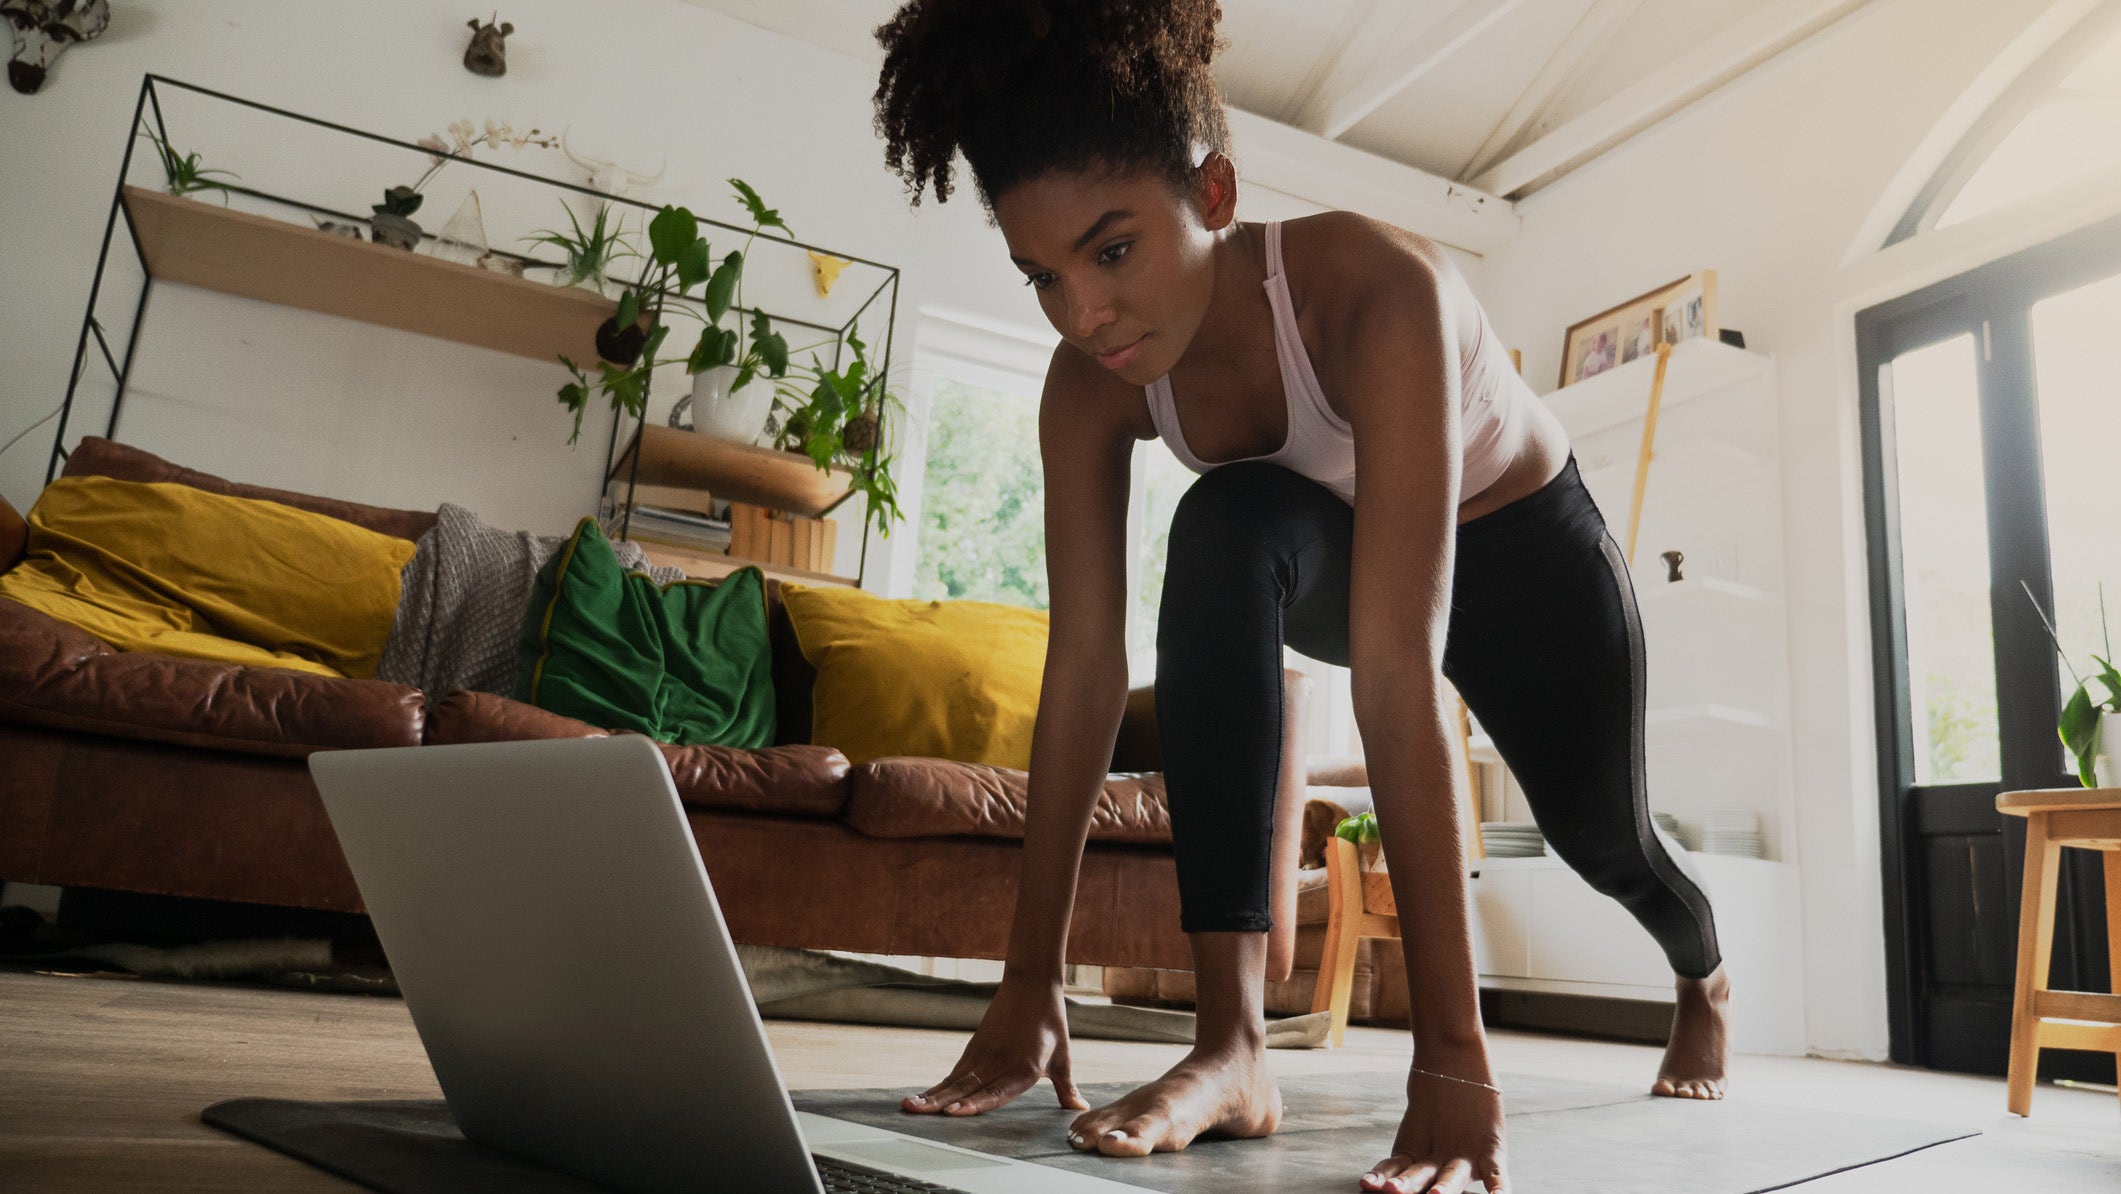 10 fitness items you can use to work out in your small apartment